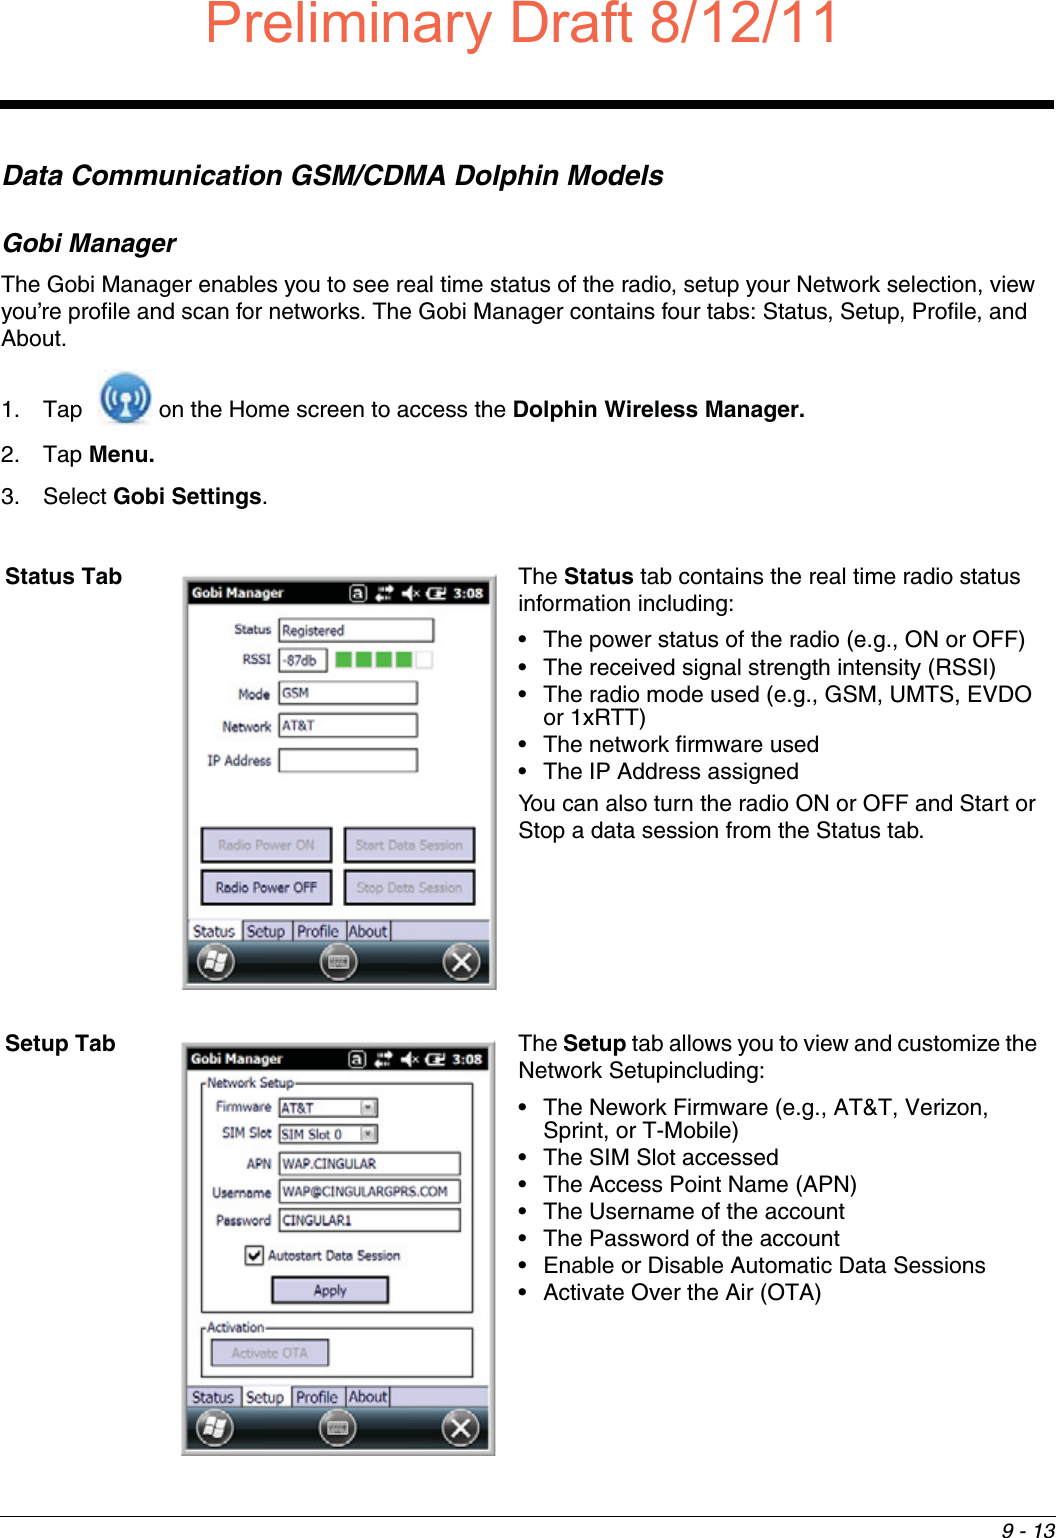 9 - 13Data Communication GSM/CDMA Dolphin ModelsGobi ManagerThe Gobi Manager enables you to see real time status of the radio, setup your Network selection, view you’re profile and scan for networks. The Gobi Manager contains four tabs: Status, Setup, Profile, and About.1. Tap   on the Home screen to access the Dolphin Wireless Manager.2. Tap Menu. 3. Select Gobi Settings.Status Tab The Status tab contains the real time radio status information including:• The power status of the radio (e.g., ON or OFF)• The received signal strength intensity (RSSI)• The radio mode used (e.g., GSM, UMTS, EVDO or 1xRTT)• The network firmware used• The IP Address assignedYou can also turn the radio ON or OFF and Start or Stop a data session from the Status tab.Setup Tab The Setup tab allows you to view and customize the Network Setupincluding:• The Nework Firmware (e.g., AT&amp;T, Verizon, Sprint, or T-Mobile)• The SIM Slot accessed• The Access Point Name (APN)• The Username of the account• The Password of the account• Enable or Disable Automatic Data Sessions• Activate Over the Air (OTA)Preliminary Draft8/12/11Draft_99EX-UG_Rev-b-1.pdf   123 8/12/2011   4:13:54 PM